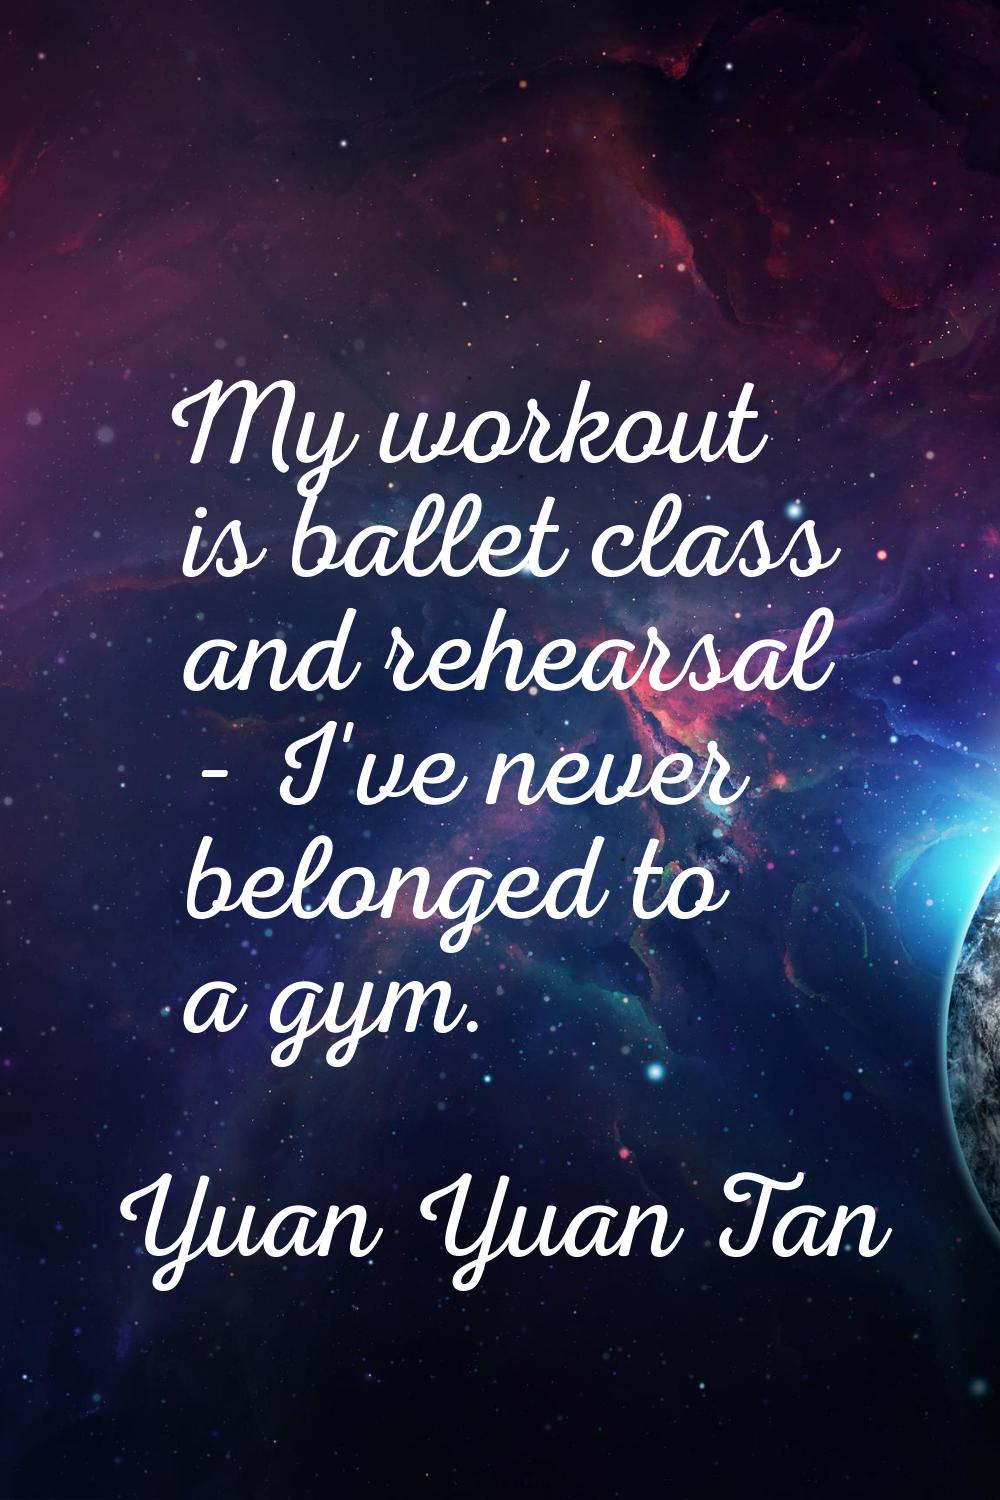 My workout is ballet class and rehearsal - I've never belonged to a gym.